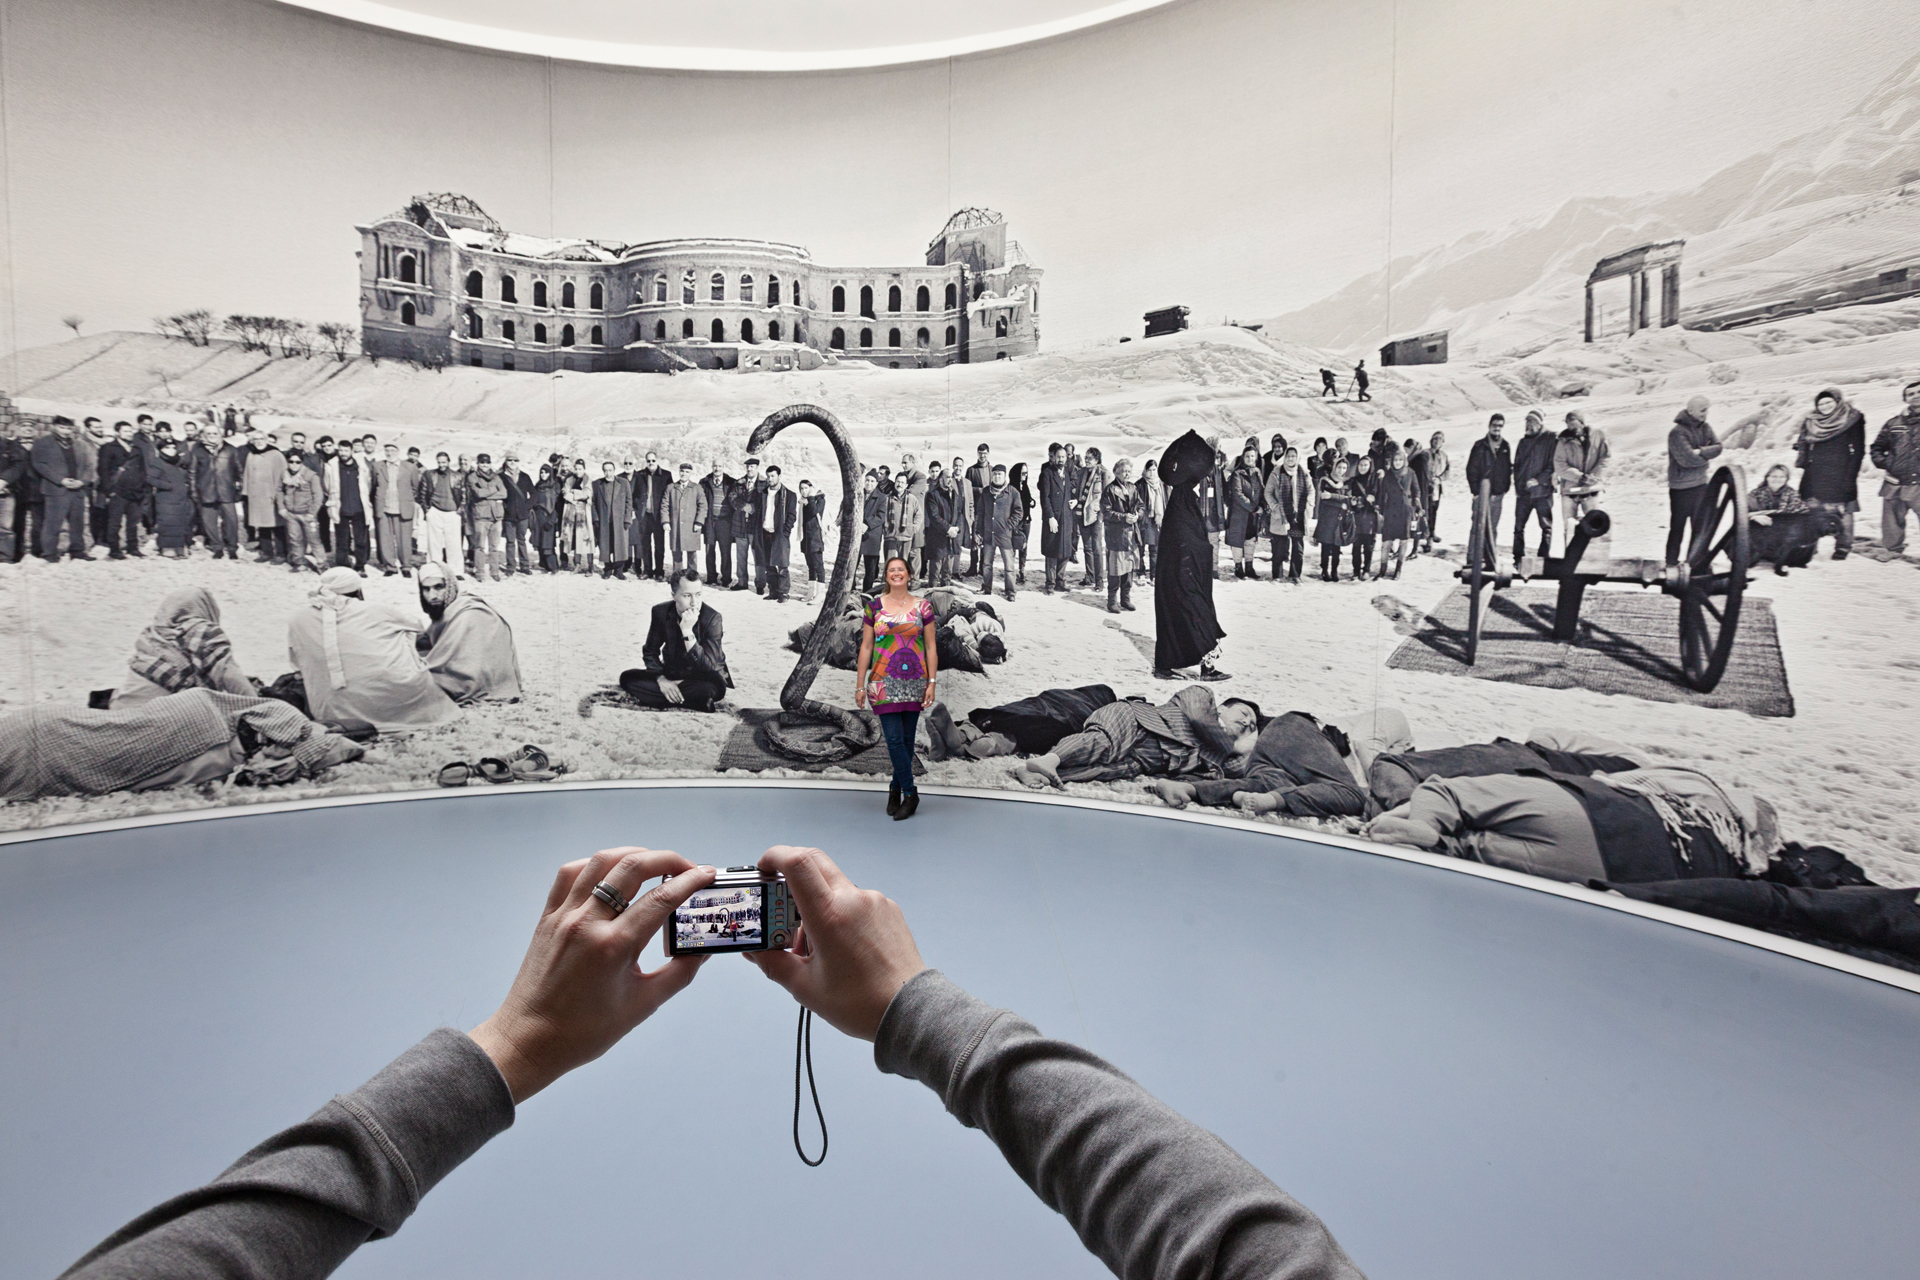  A digital collage named “Of what is, that it is; of what is not that it is not” by Goshka Macuga investigates the political potential of half truth in an exhibition display. It is one of the most popular exhibits during dOCUMENTA(13).  Kassel, Germa